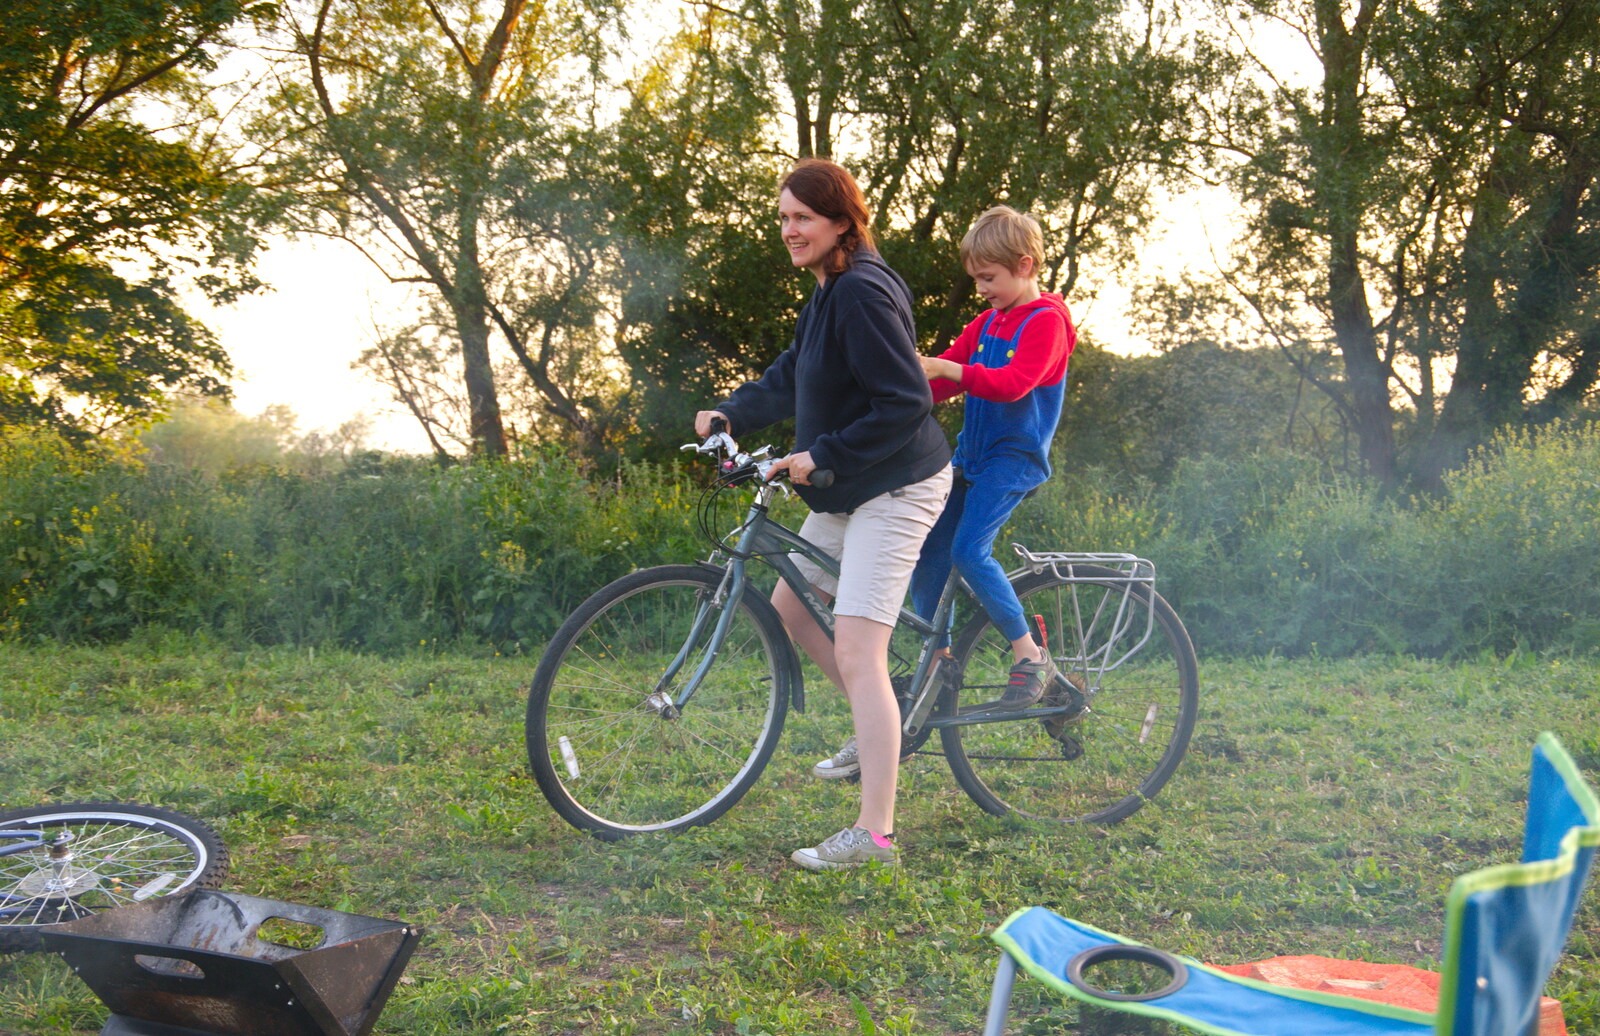 Isobel gives Harry a backie on her bike from Camping at Three Rivers, Geldeston, Norfolk - 1st June 2019